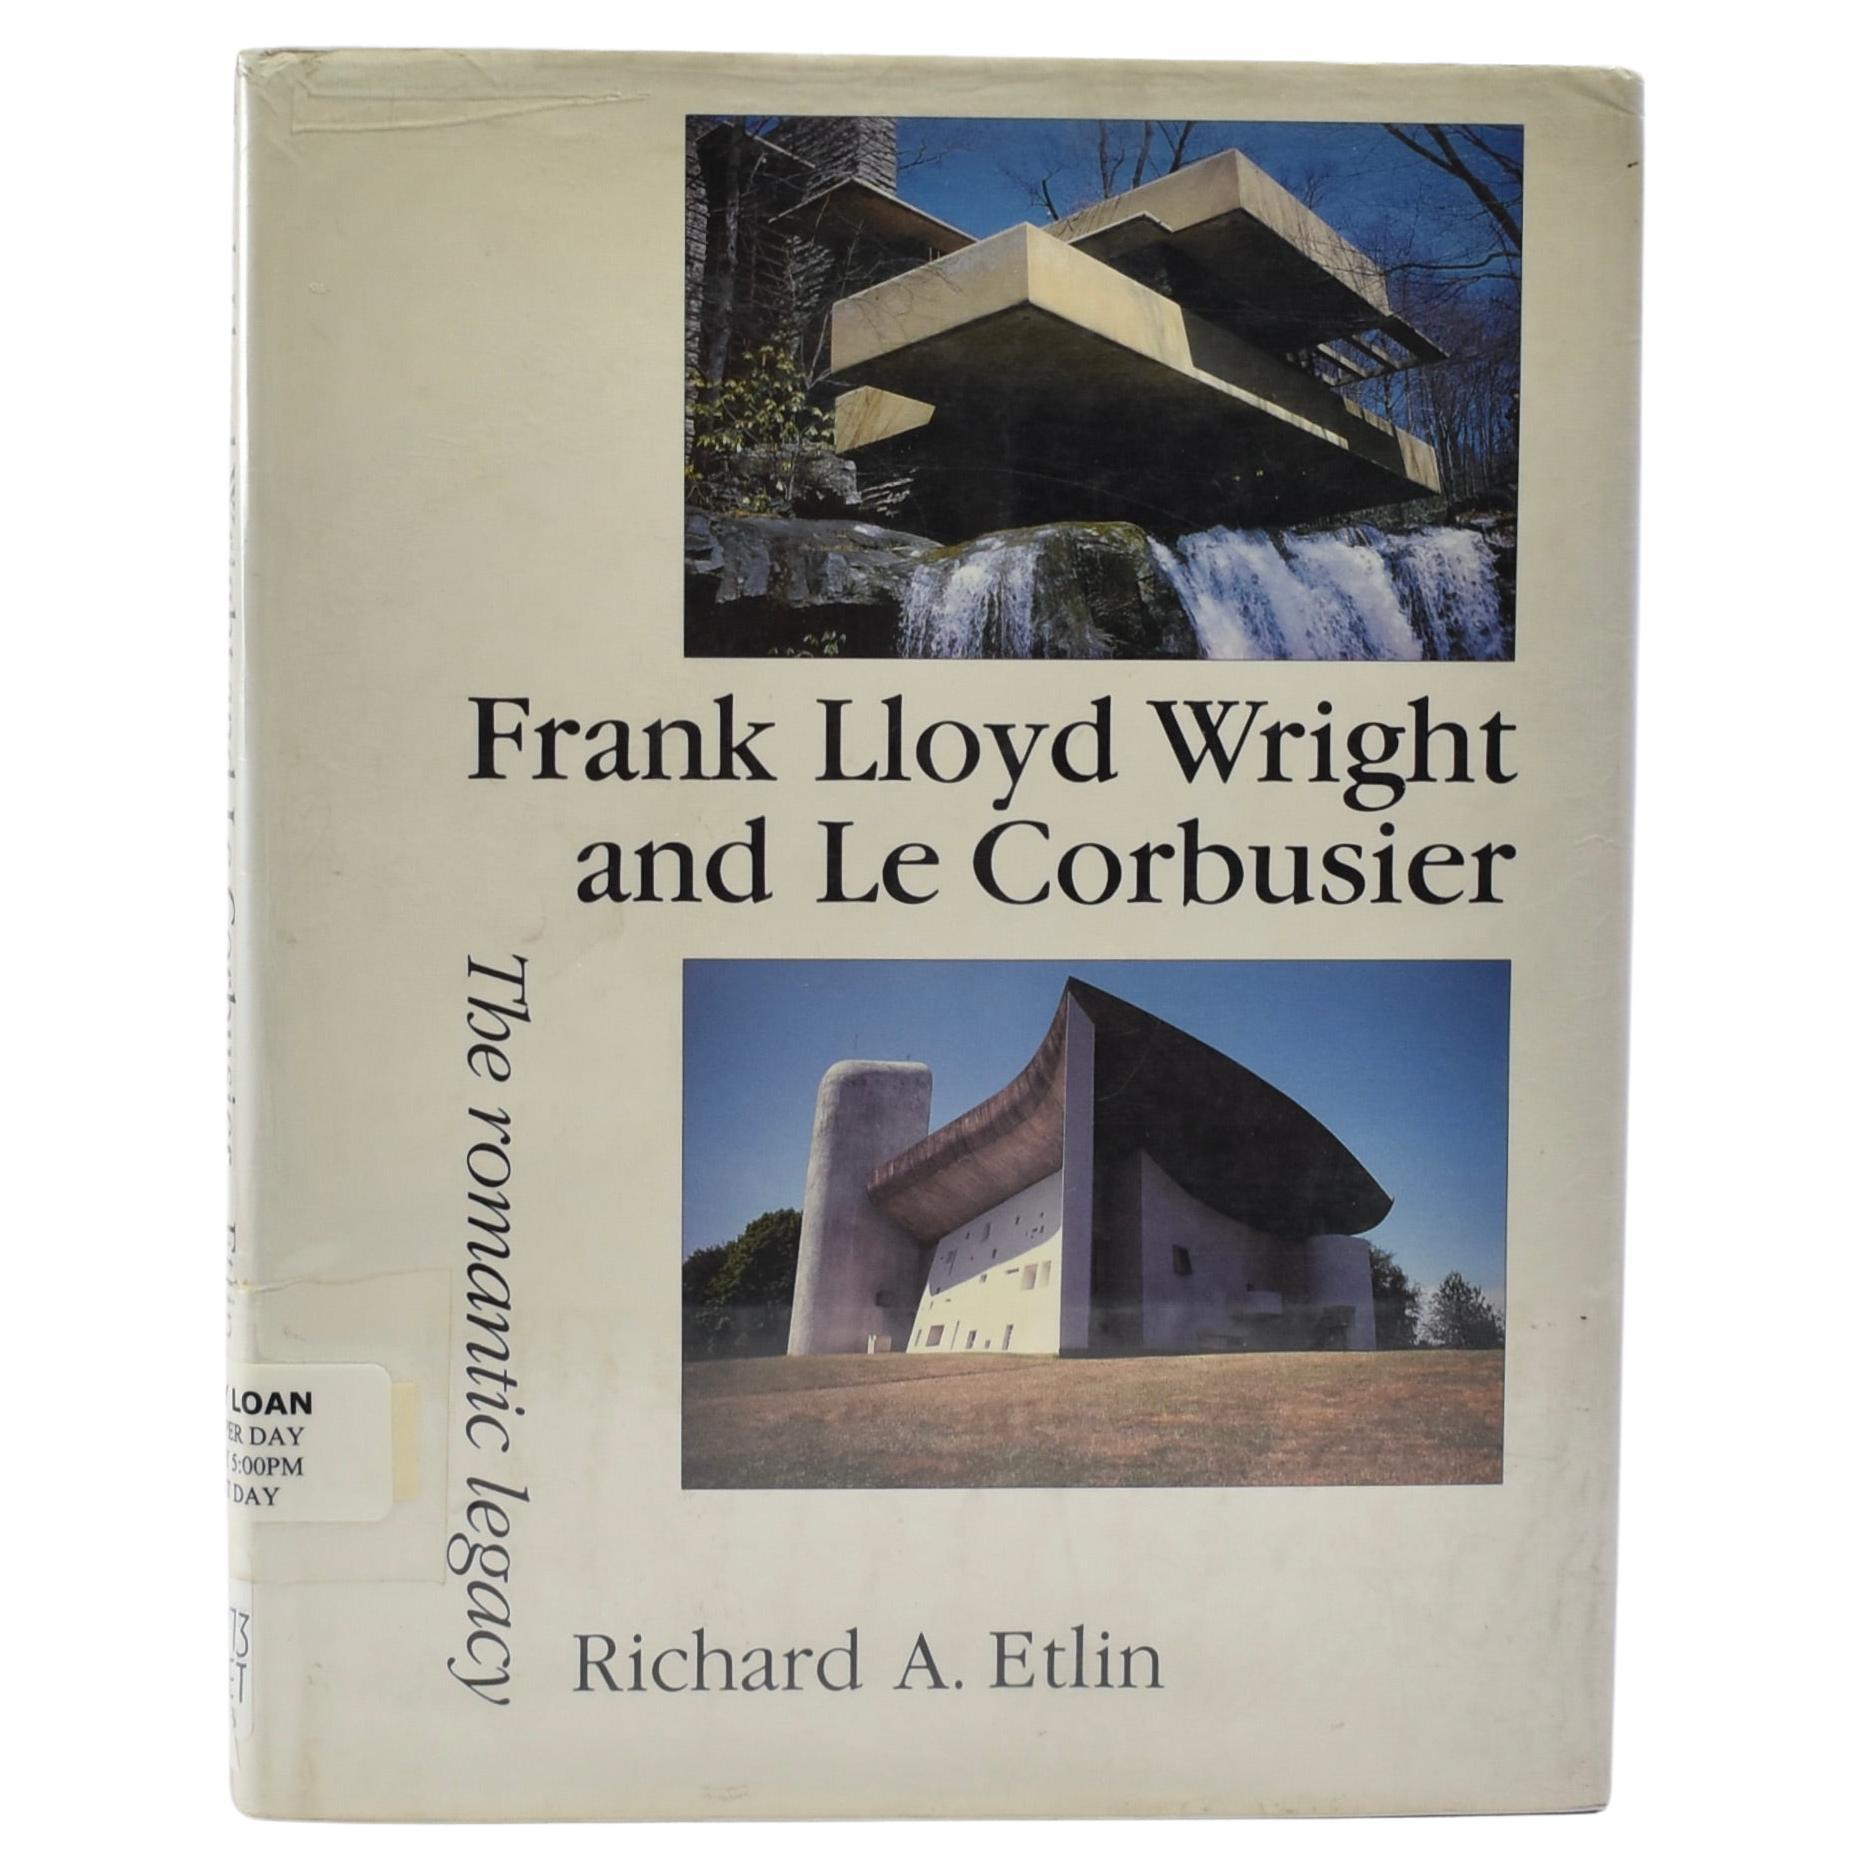 Frank Lloyd Wright and Le Corbusier